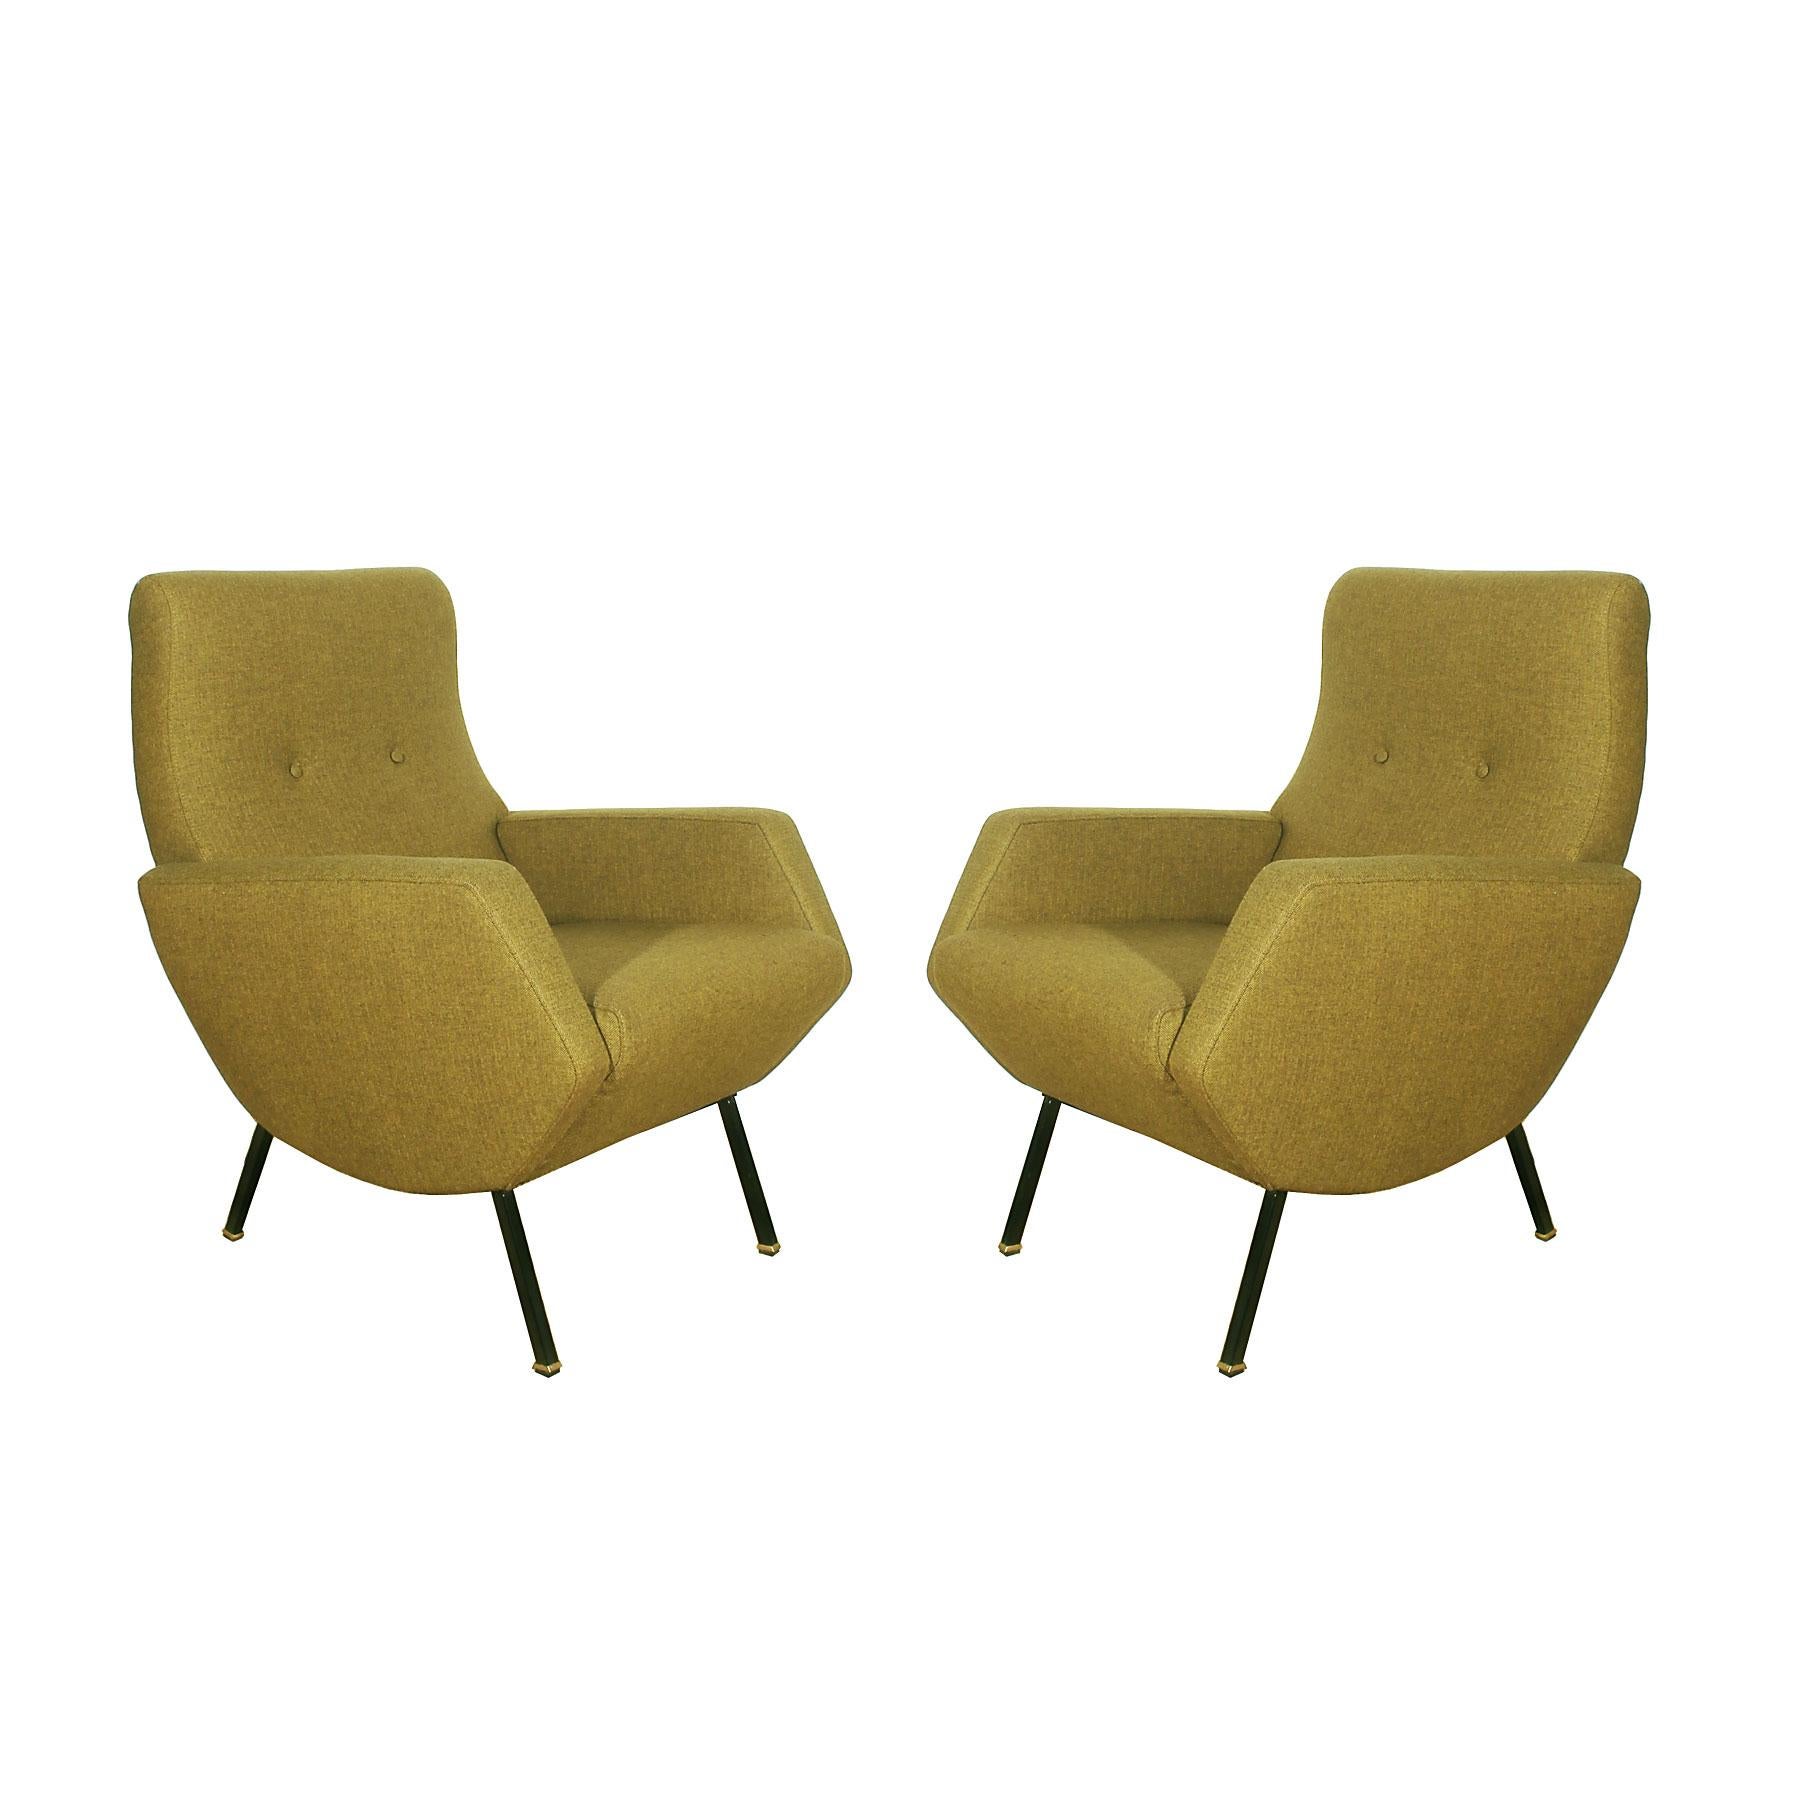 Pair of armchairs, completely restored, new mottled yellow fabric upholstery, black lacquered wrought iron stands, brass accessories, 
Italy, circa 1960.